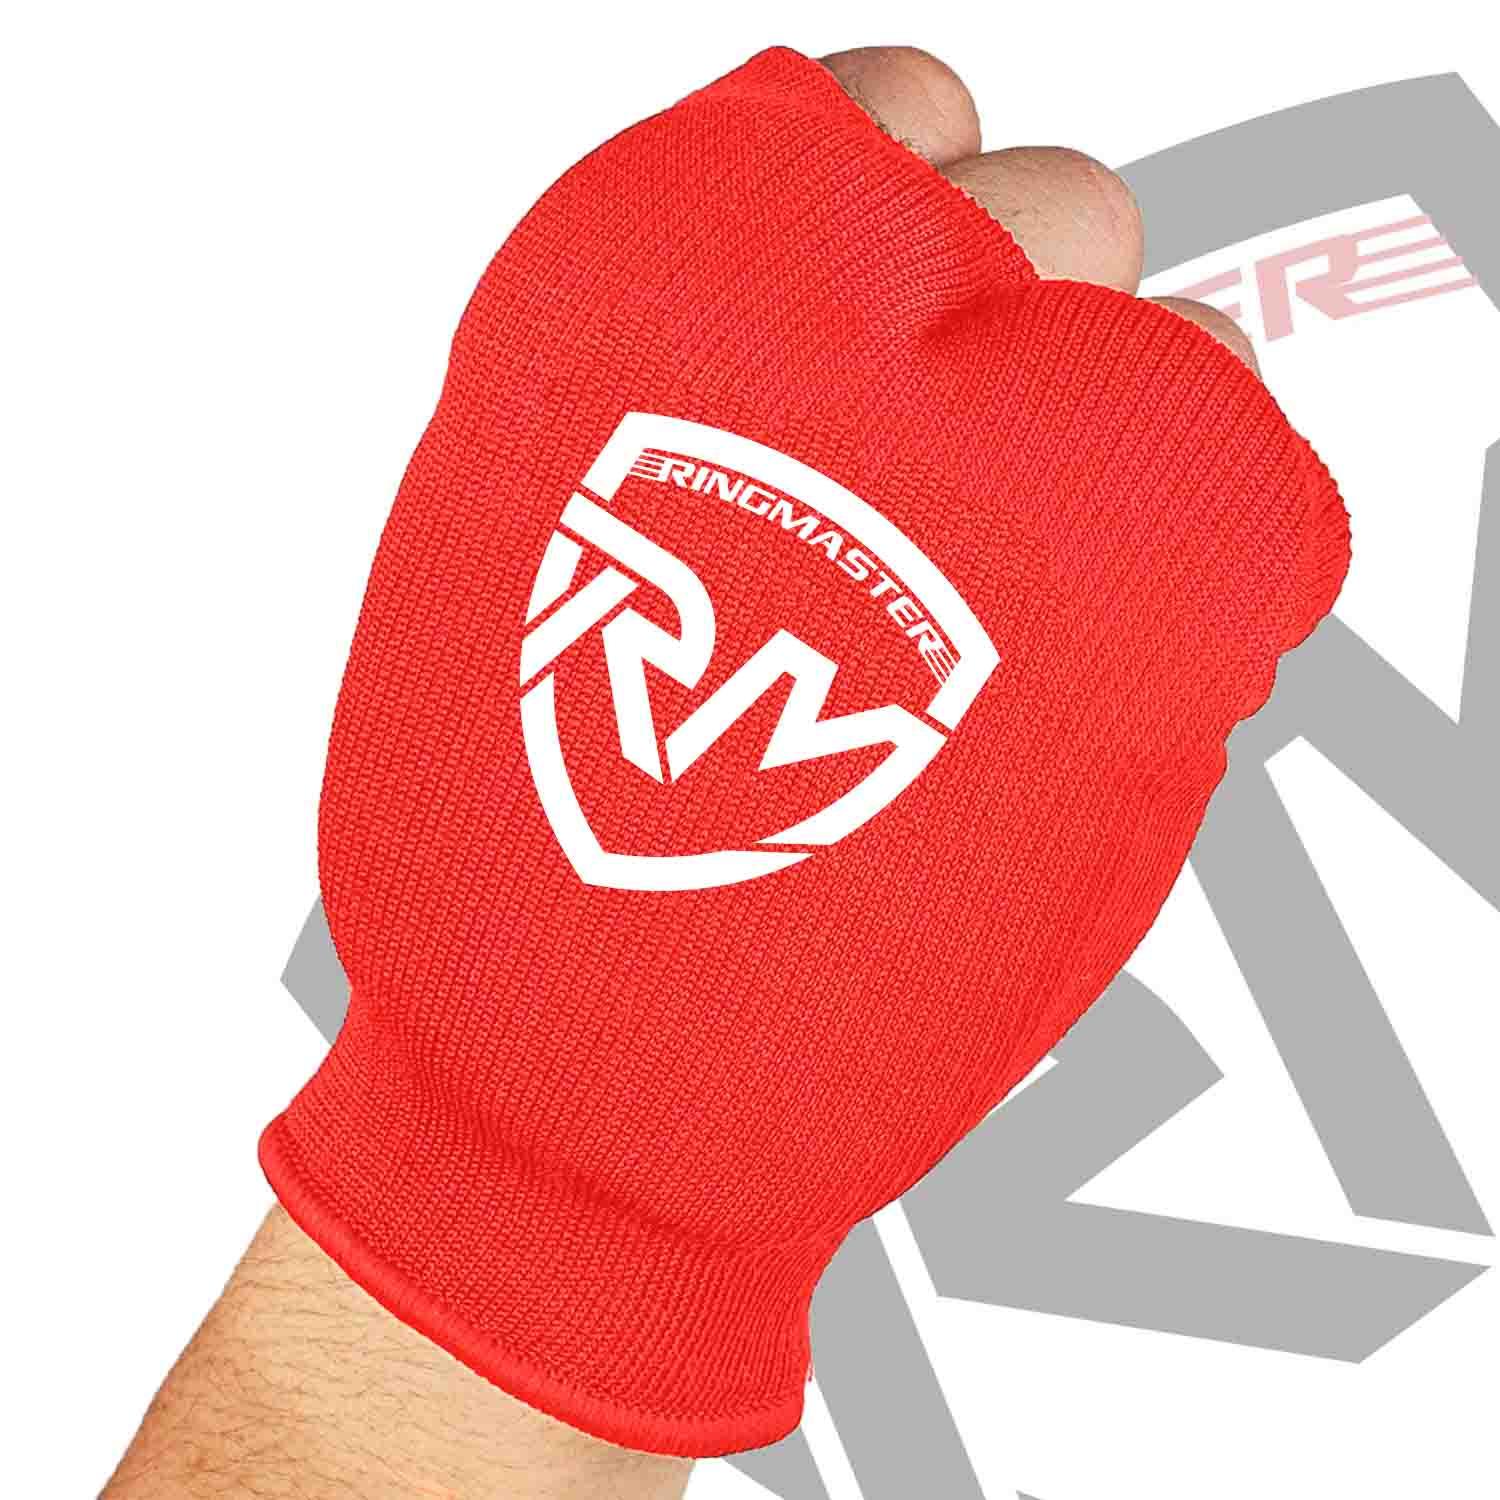 RingMaster Sports Kids Slip on Elastic Hand Pads Mitts Red - RINGMASTER SPORTS - Made For Champions